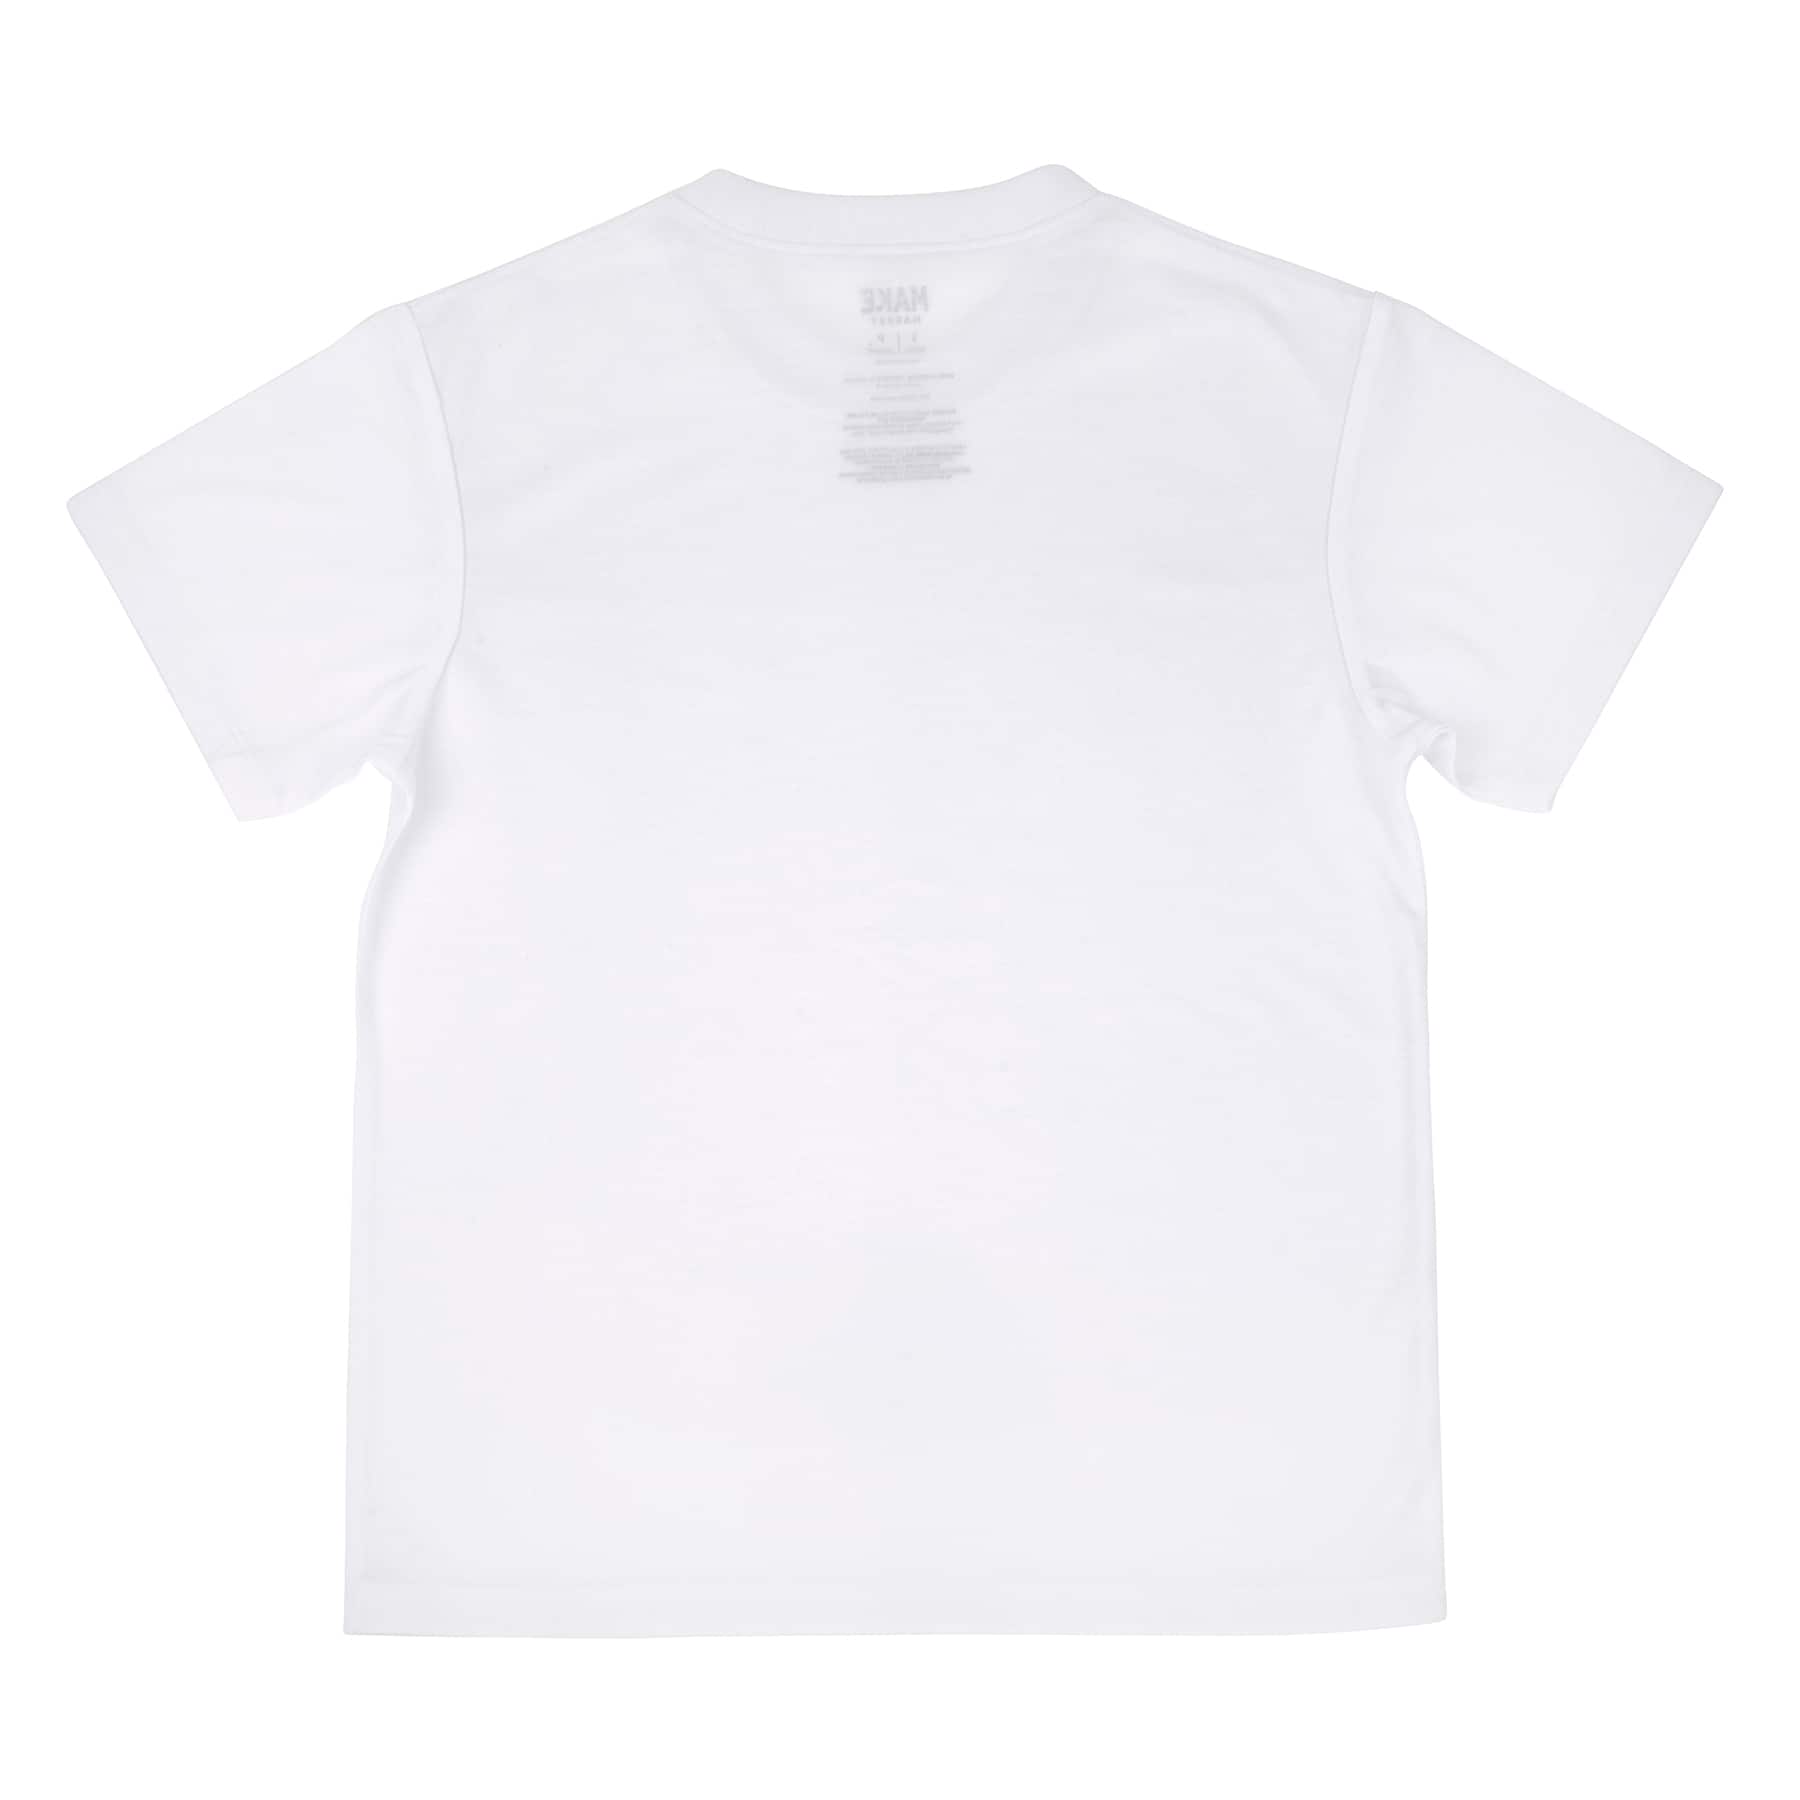 Under Armour 100% Polyester White Active T-Shirt Size X-Small (Youth) - 51%  off